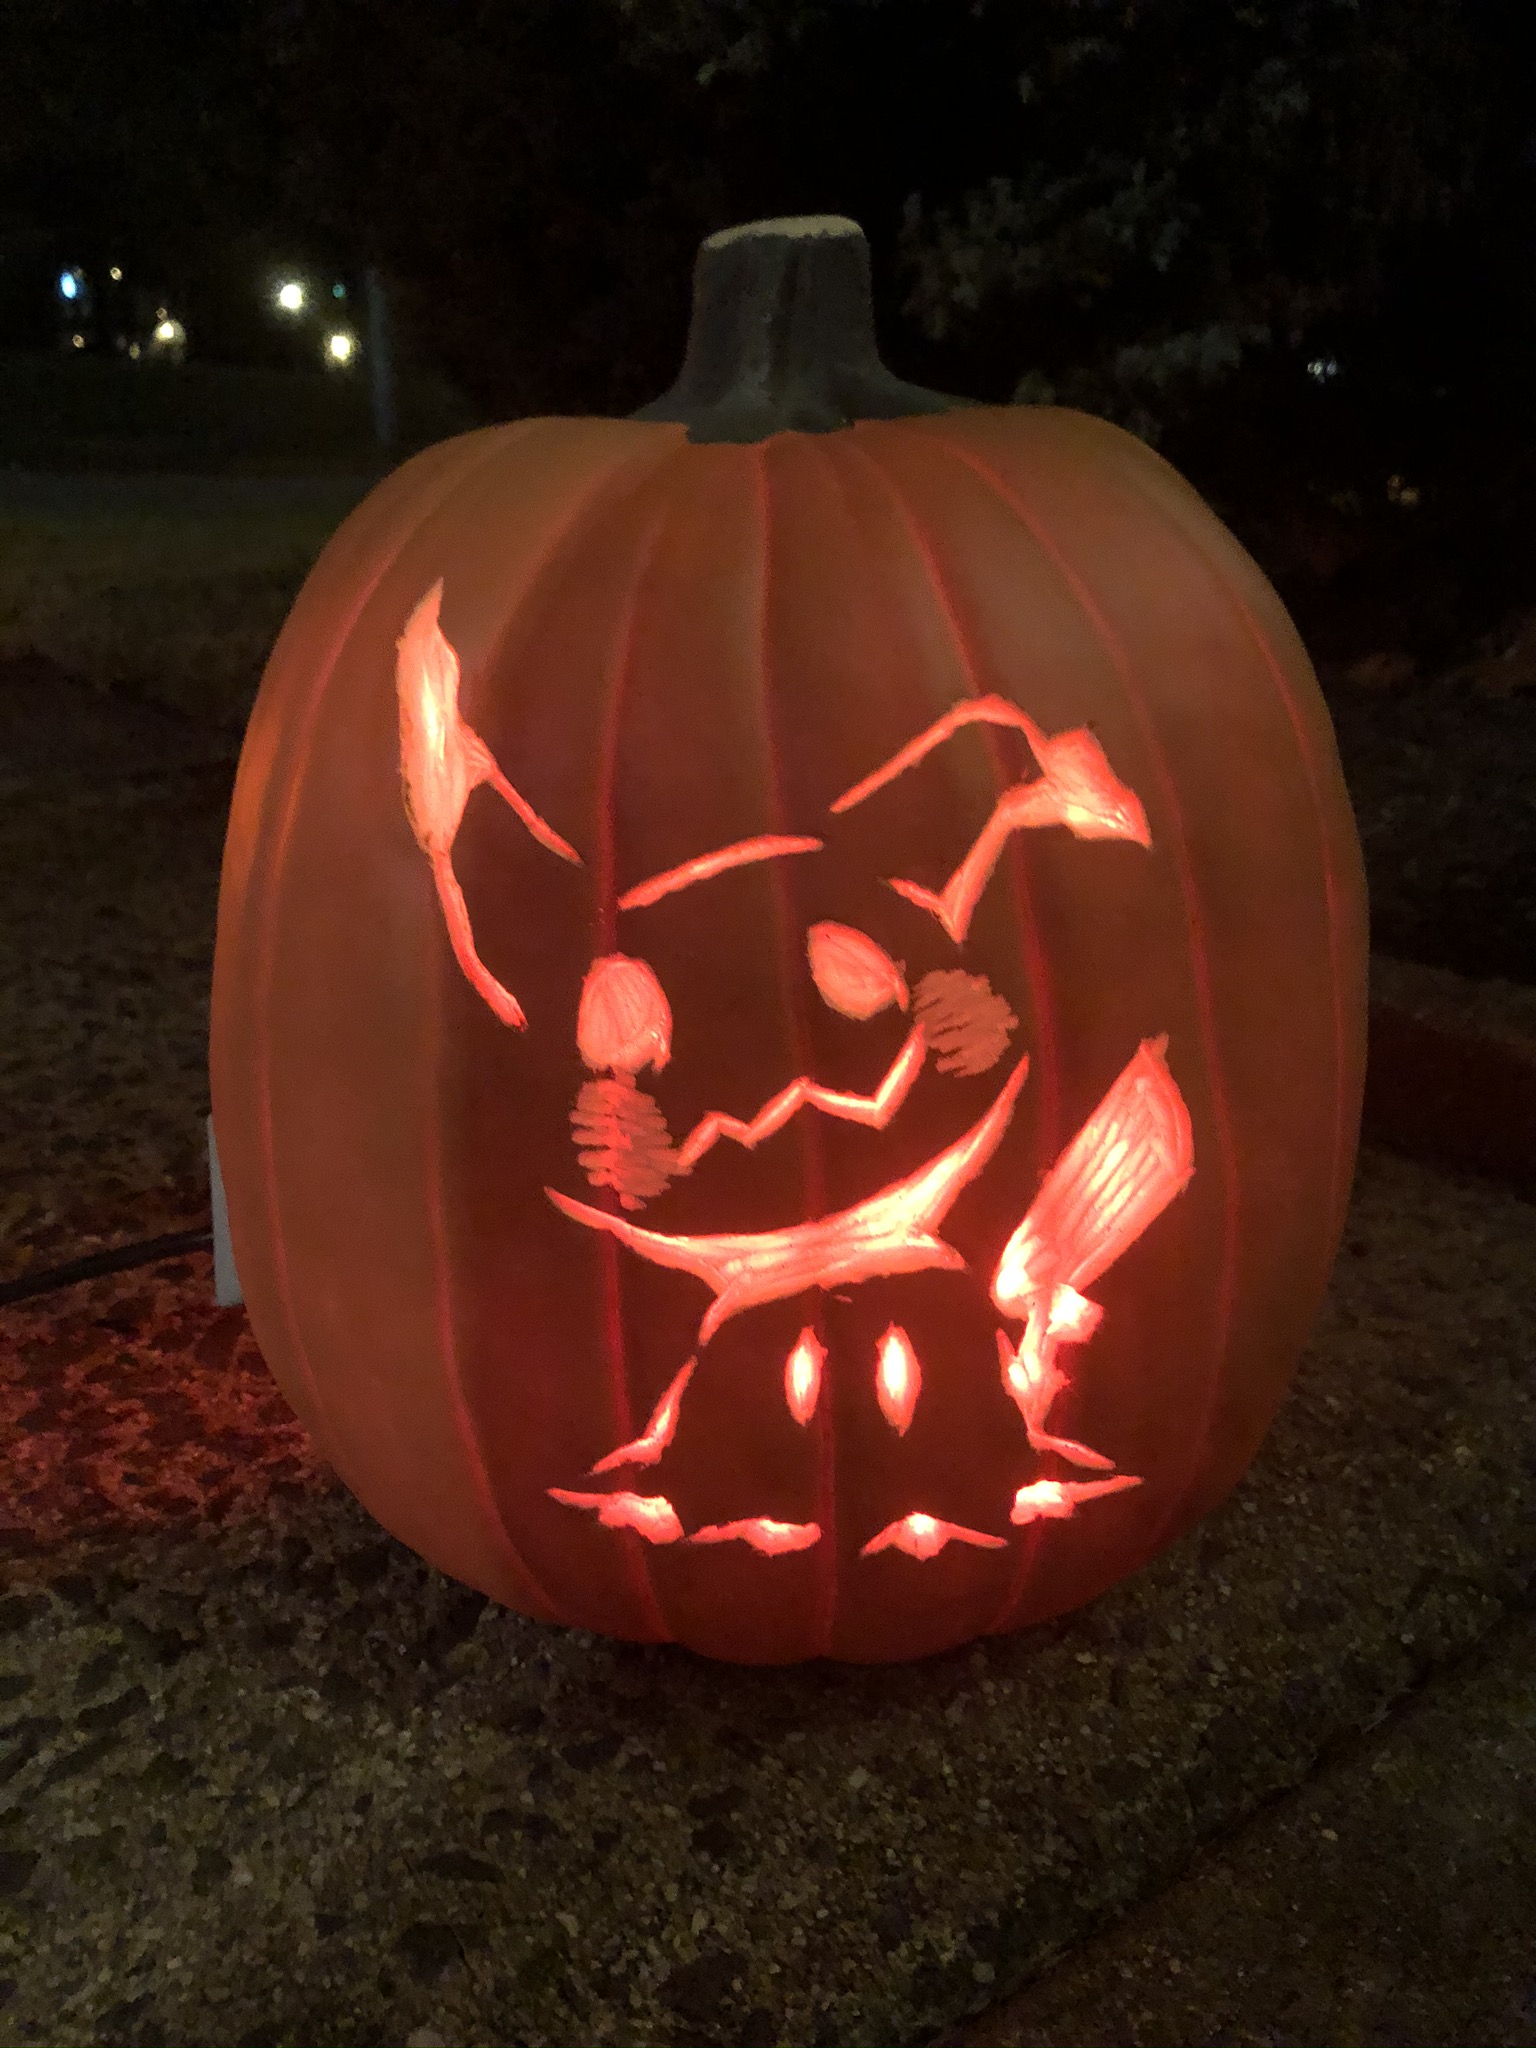 An orange foam pumpkin with Mimikyu carved on it. Mimikyu is glowing red because of a red light inside the pumpkin.